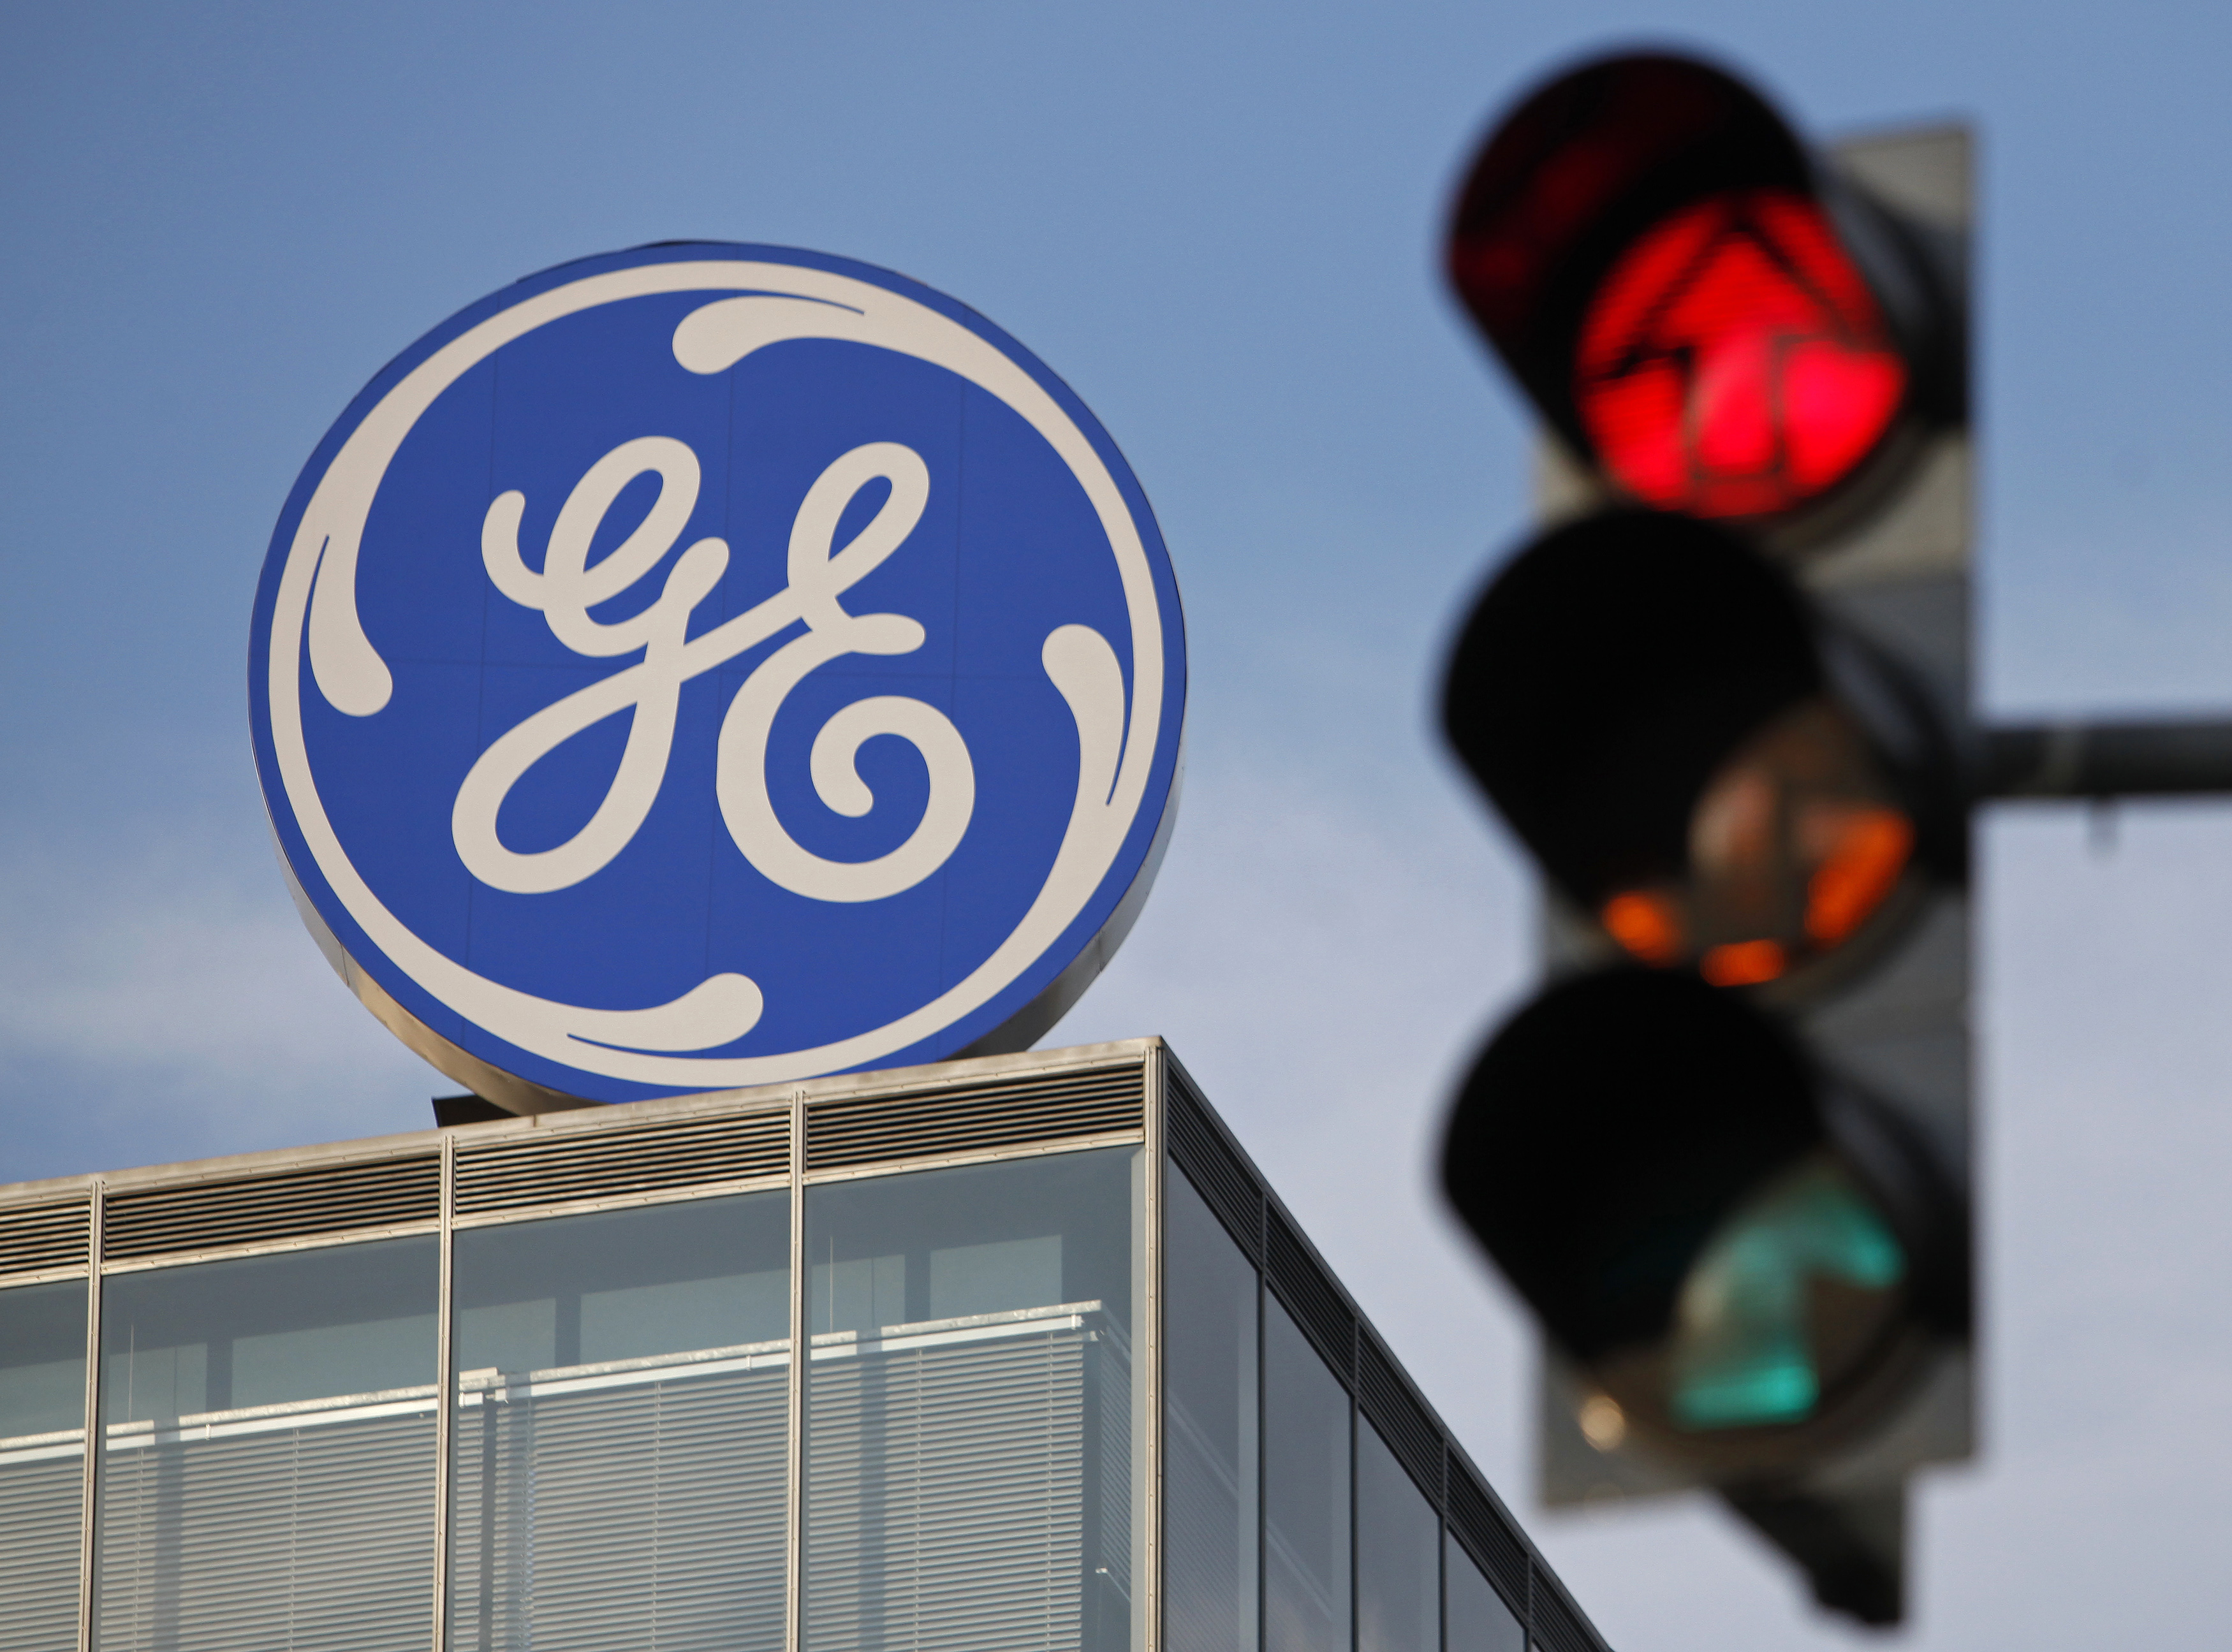 The logo of the GE Money Bank is seen behind a traffic light in Prague